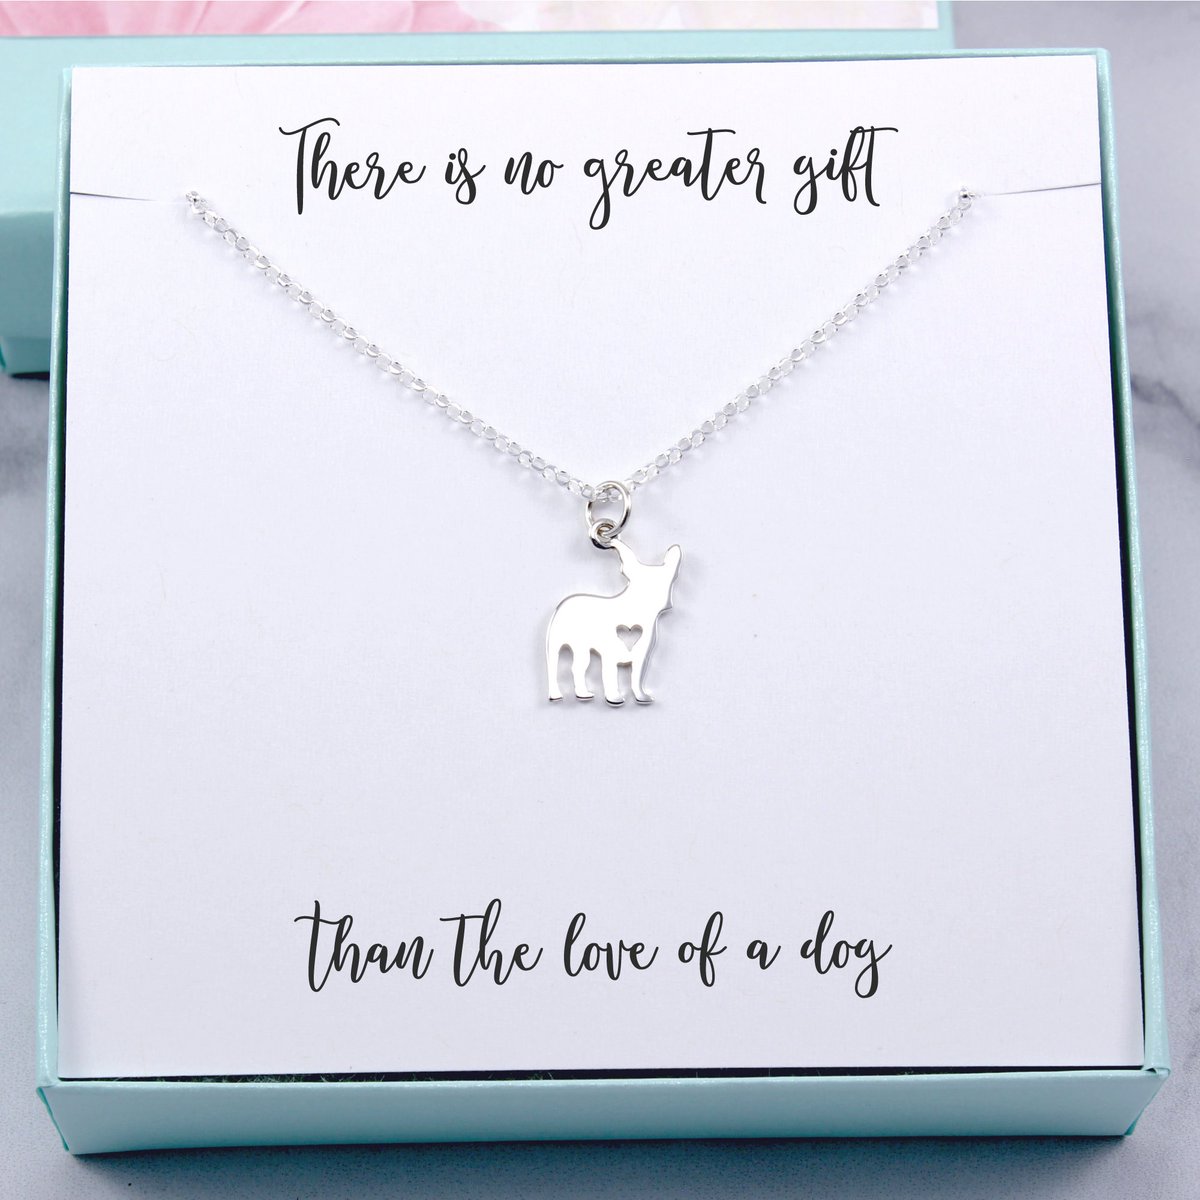 French Bulldog Pendant Necklace, sterling silver, Frenchie owner gift, dog lover birthday, pet heart charm jewelry, memorial remembrance tuppu.net/8d0d58 #giftsforher #shopsmall #giftideas #etsyfinds #Etsy #etsygifts #etsyshop